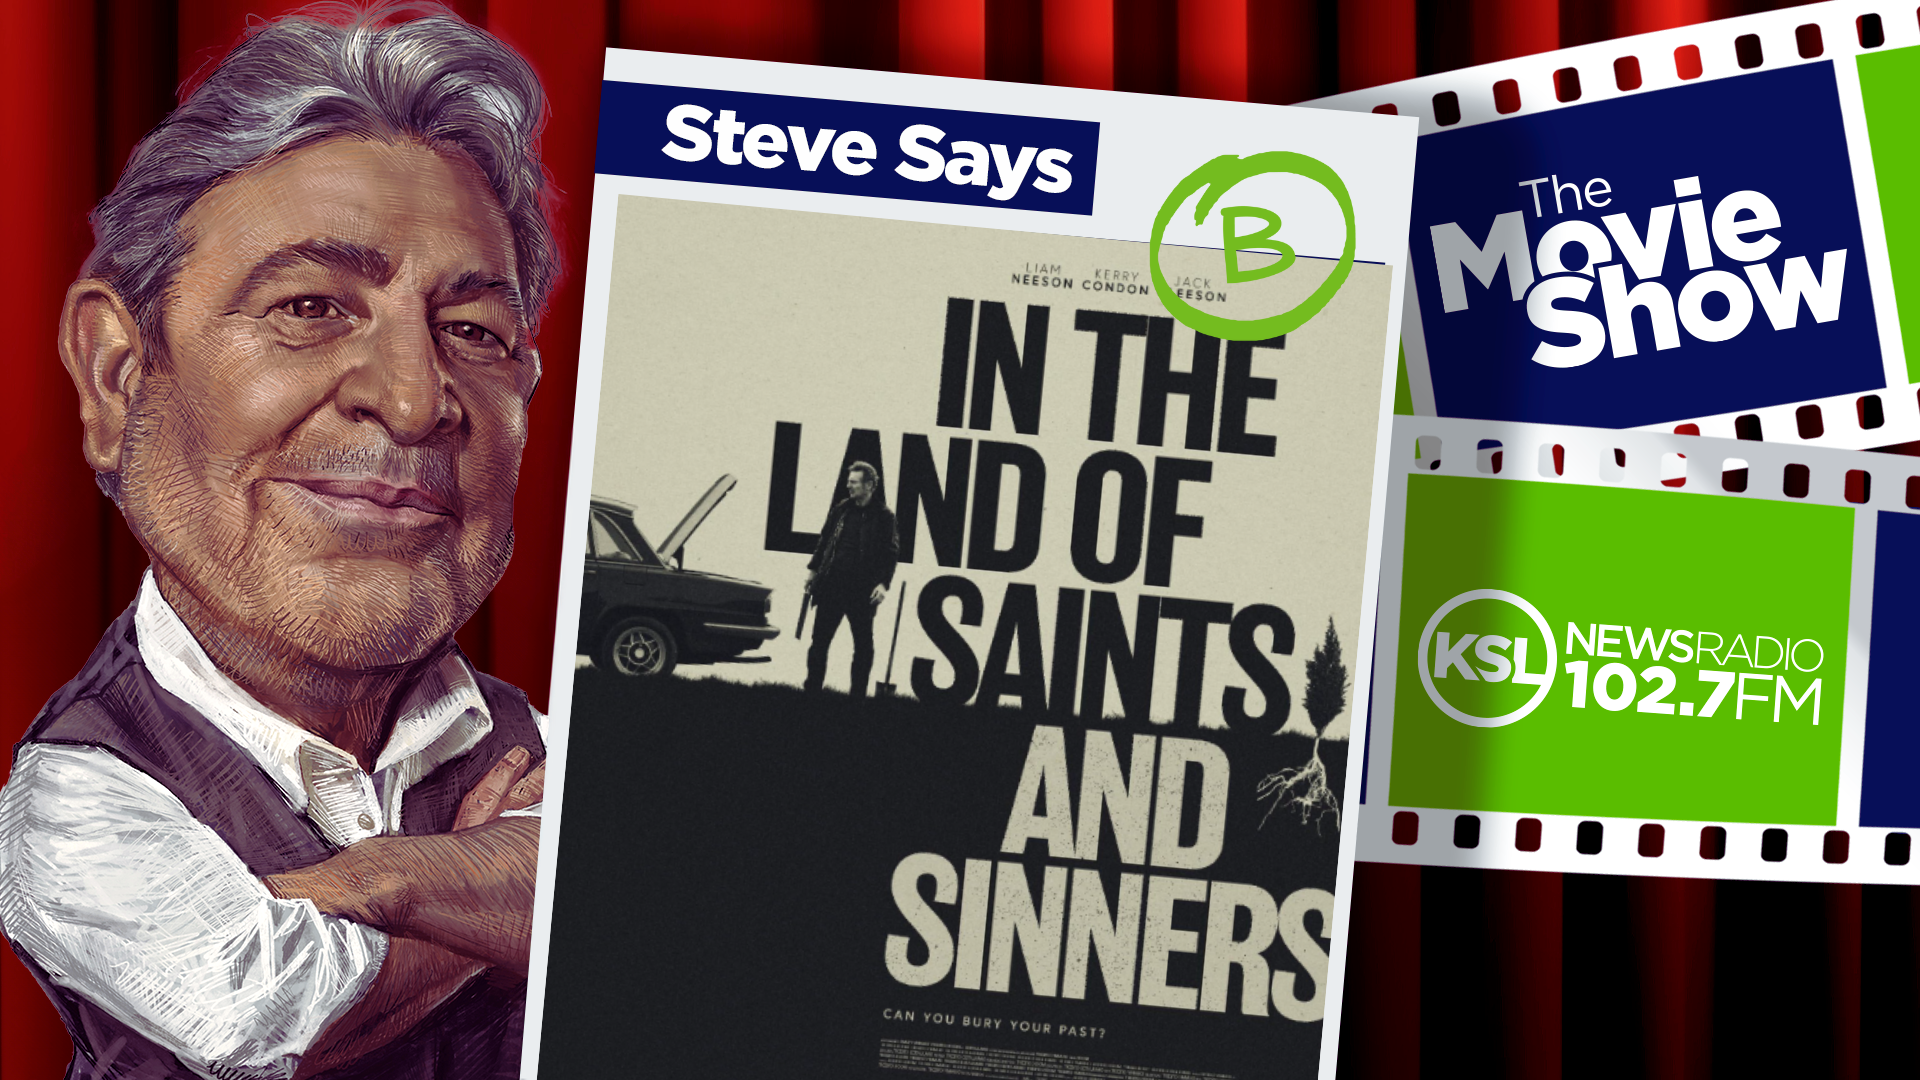 in the land of saints and sinners poster next to ksl movie show host steve salles...